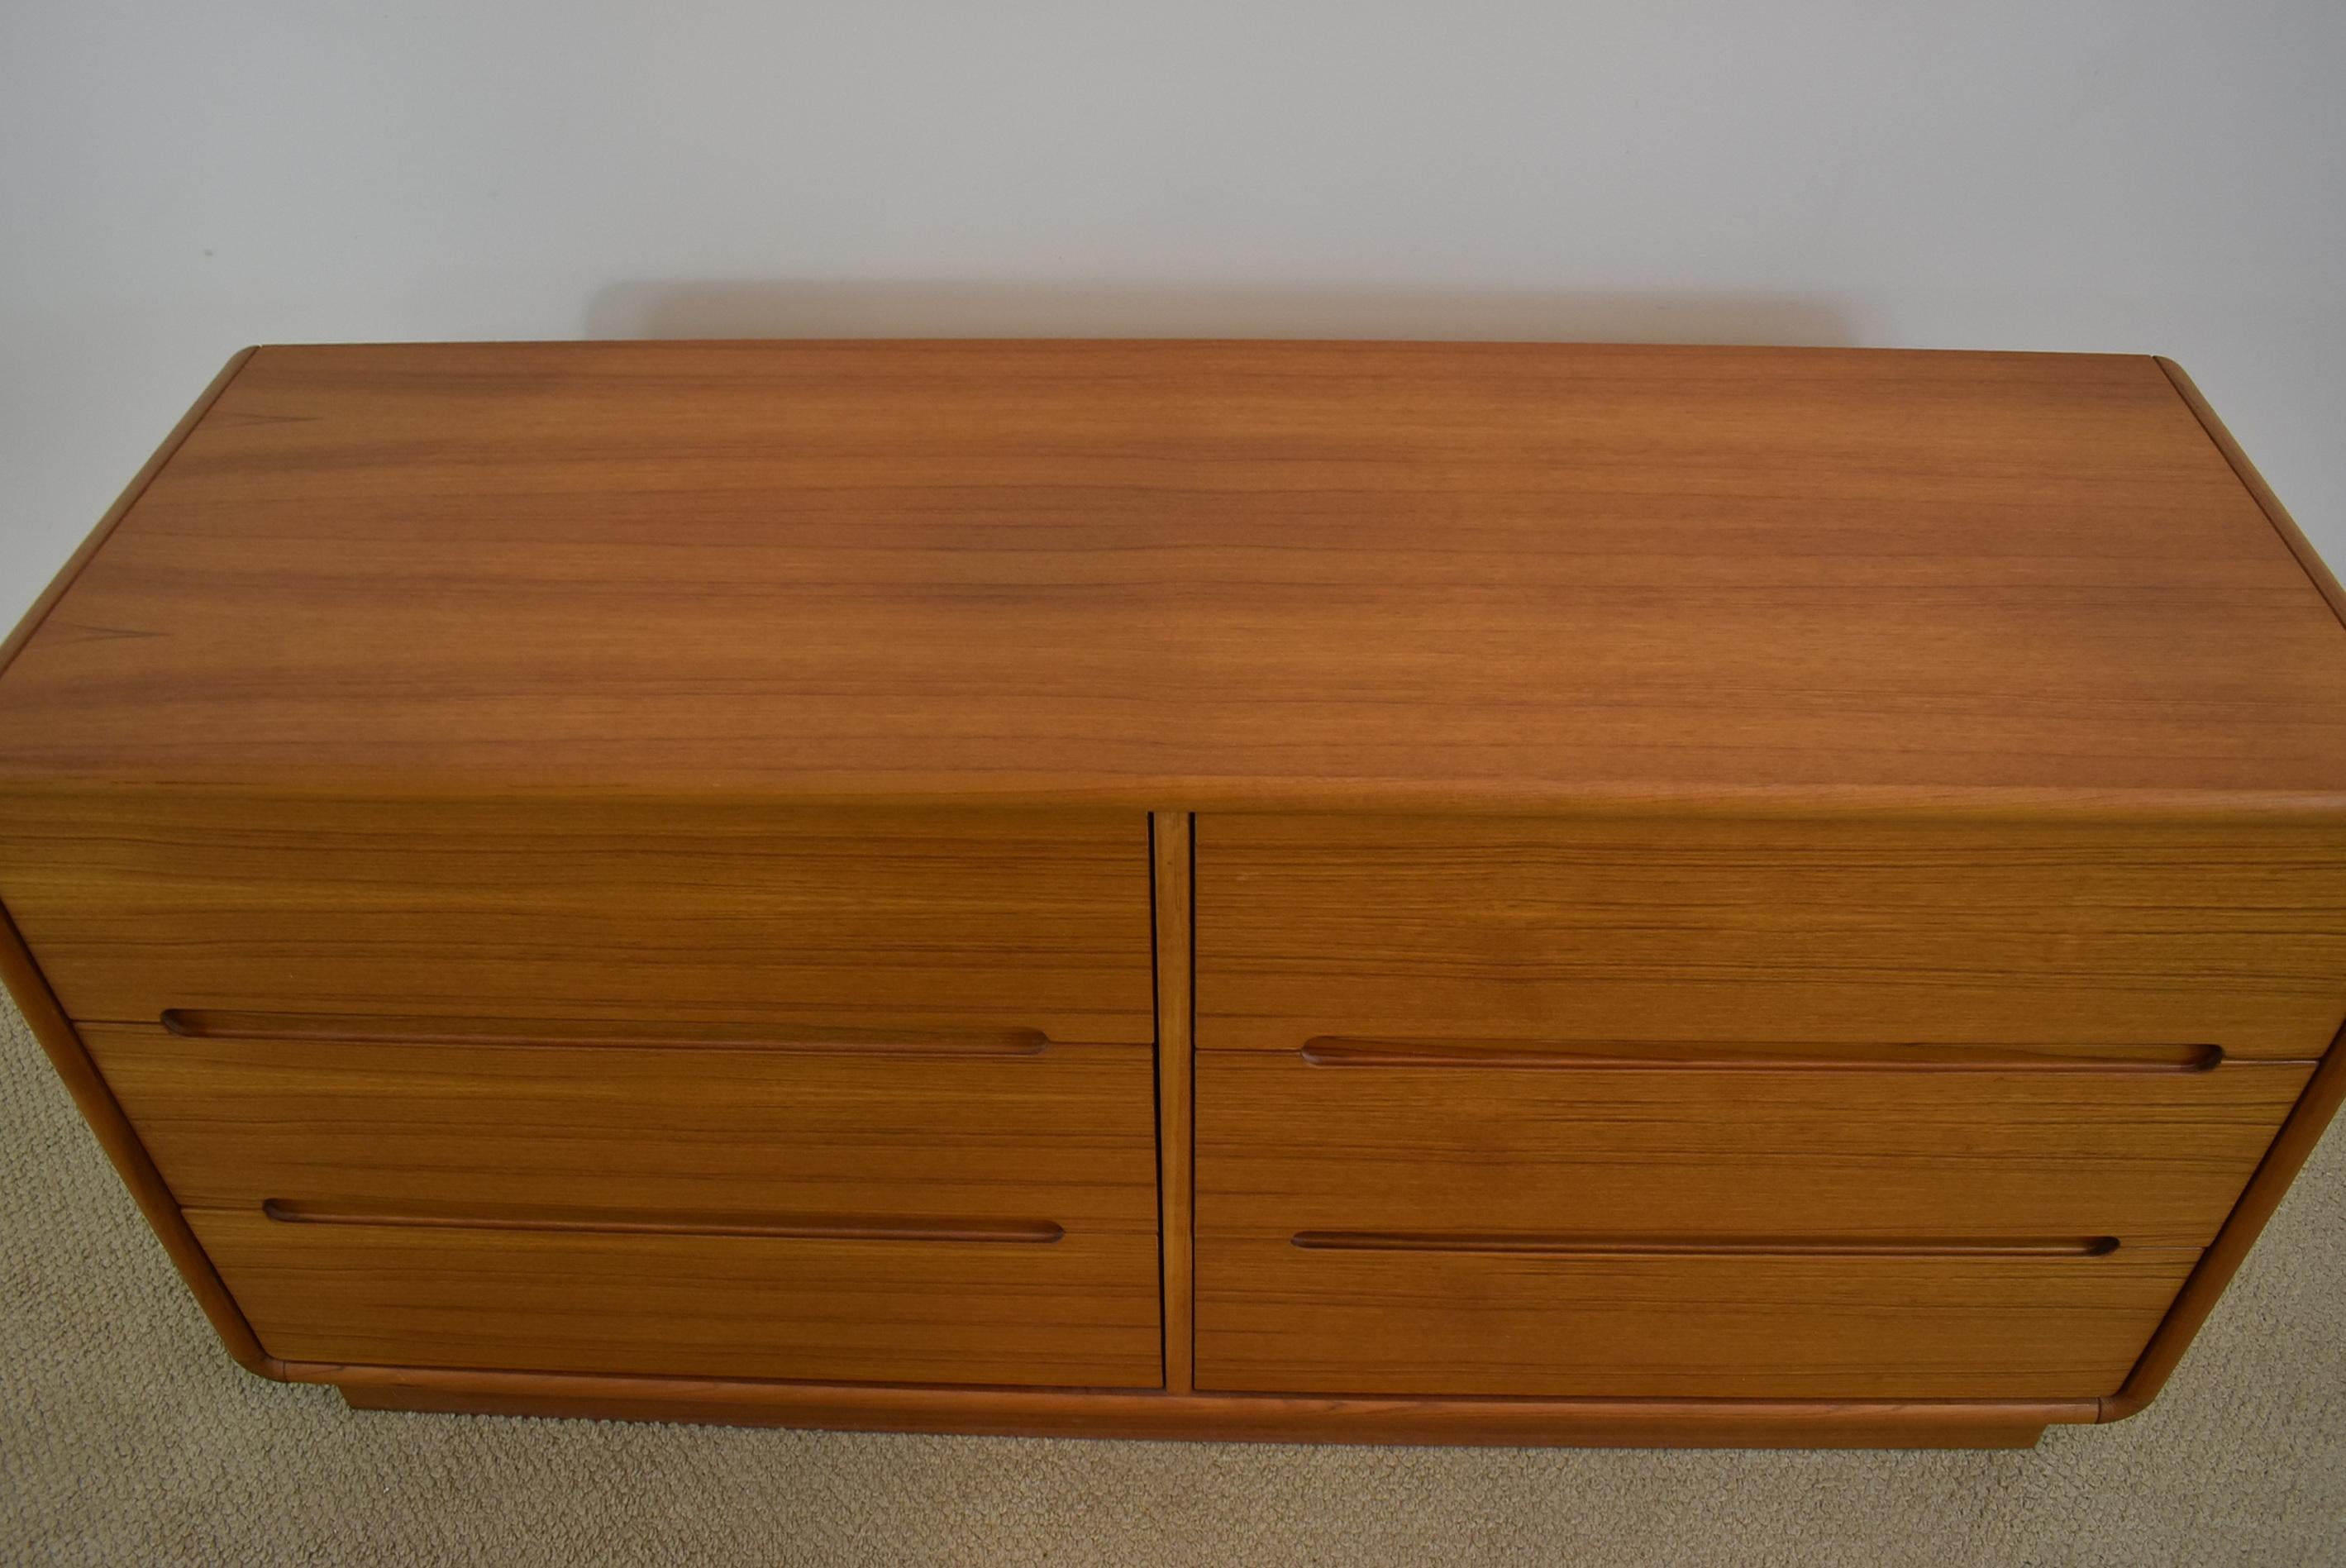 Six-drawer Mid-Century Modern teak chest platform base with a contoured design. The back is finished. Very nice condition. 57.5